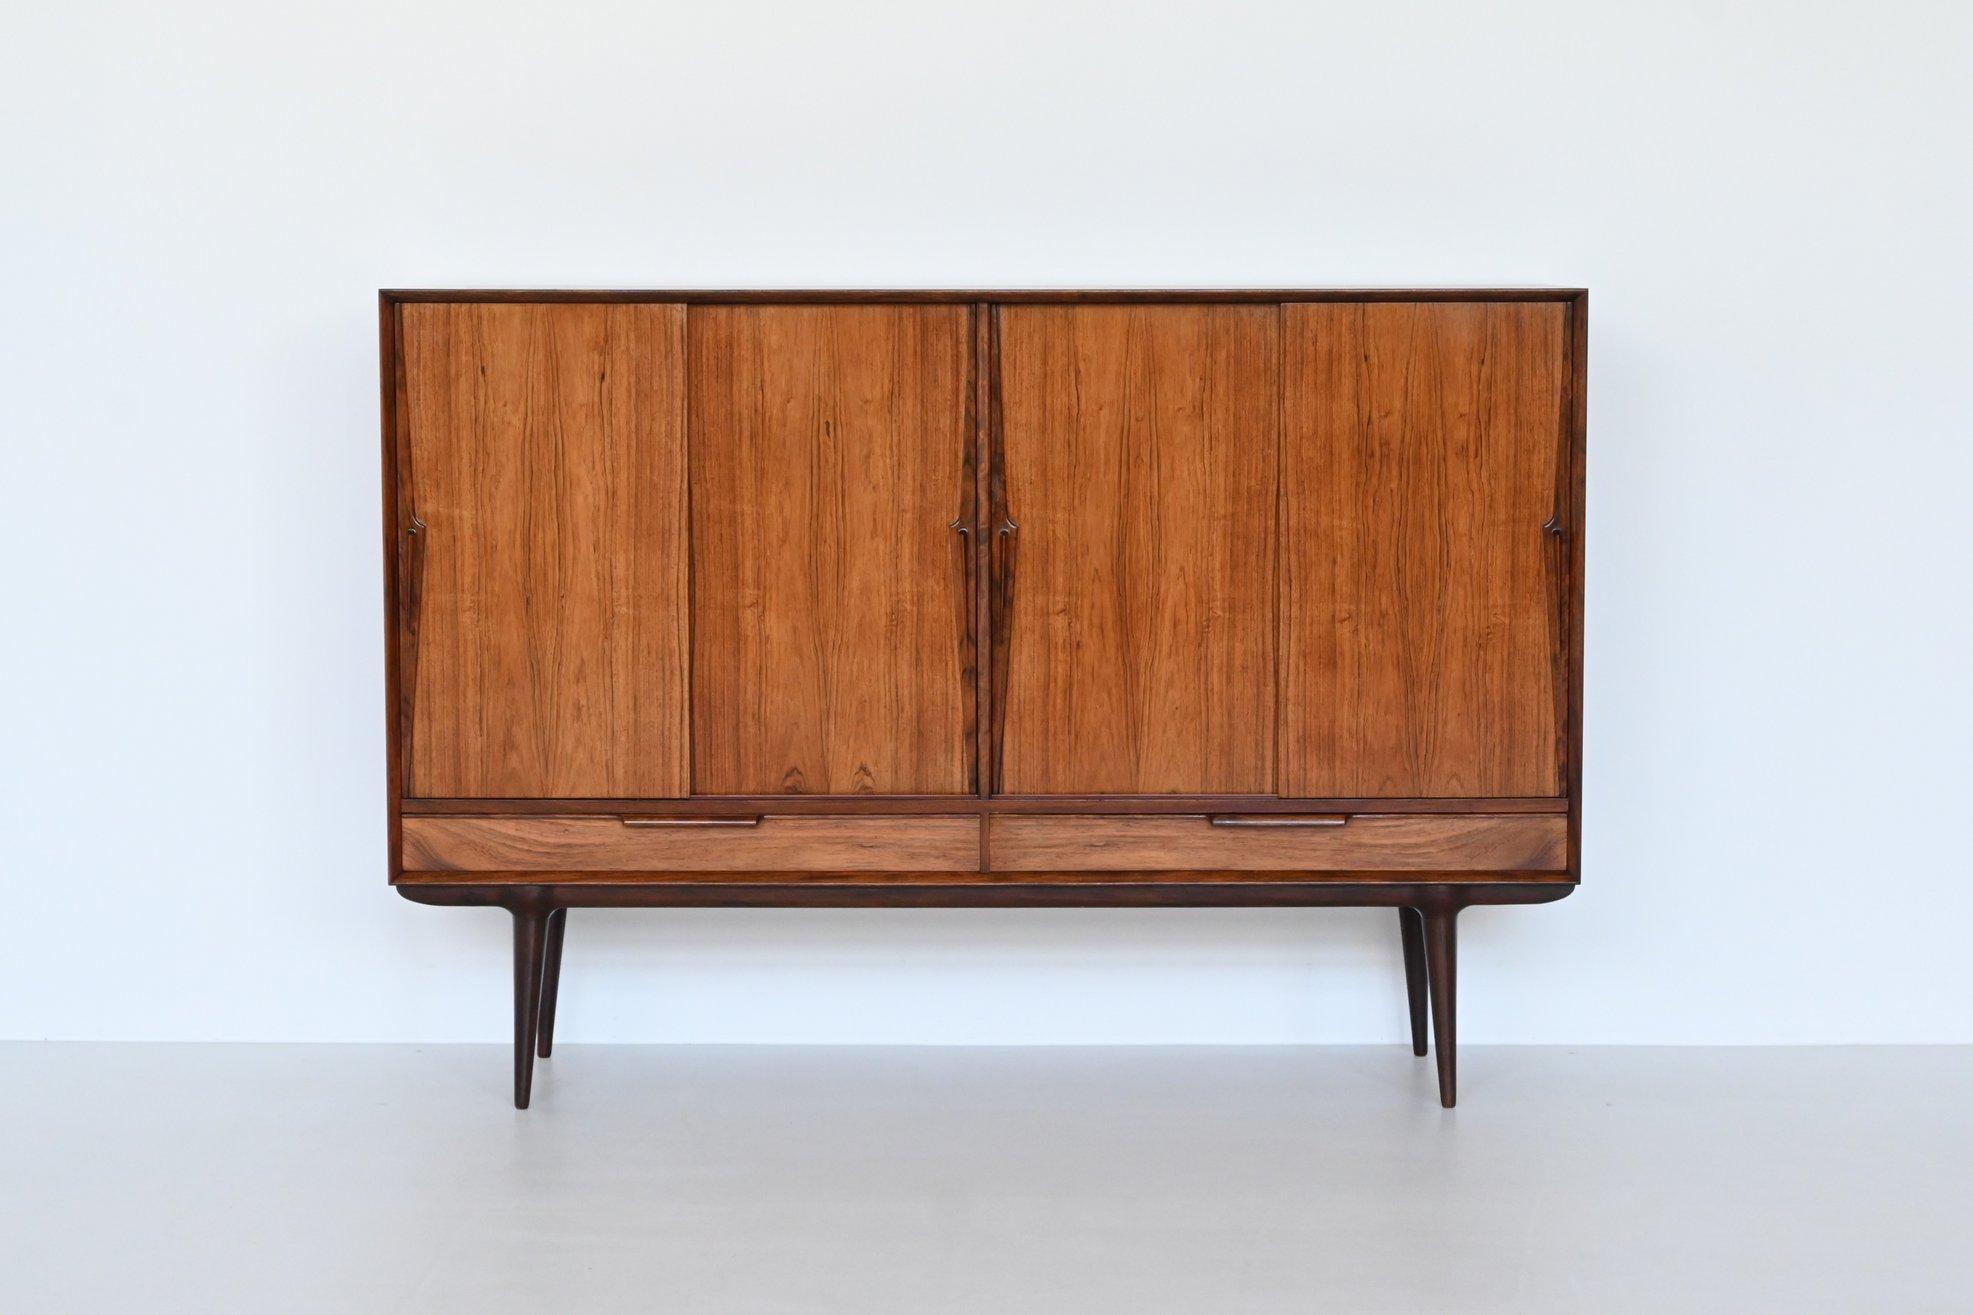 Beautiful highboard model 13 designed by Gunni Omann and manufactured by Omann Jun, Denmark 1960. Superb example of Danish refined furniture. This rosewood highboard features wonderful details and great craftsmanship which Omann Jun and Gunni Omann